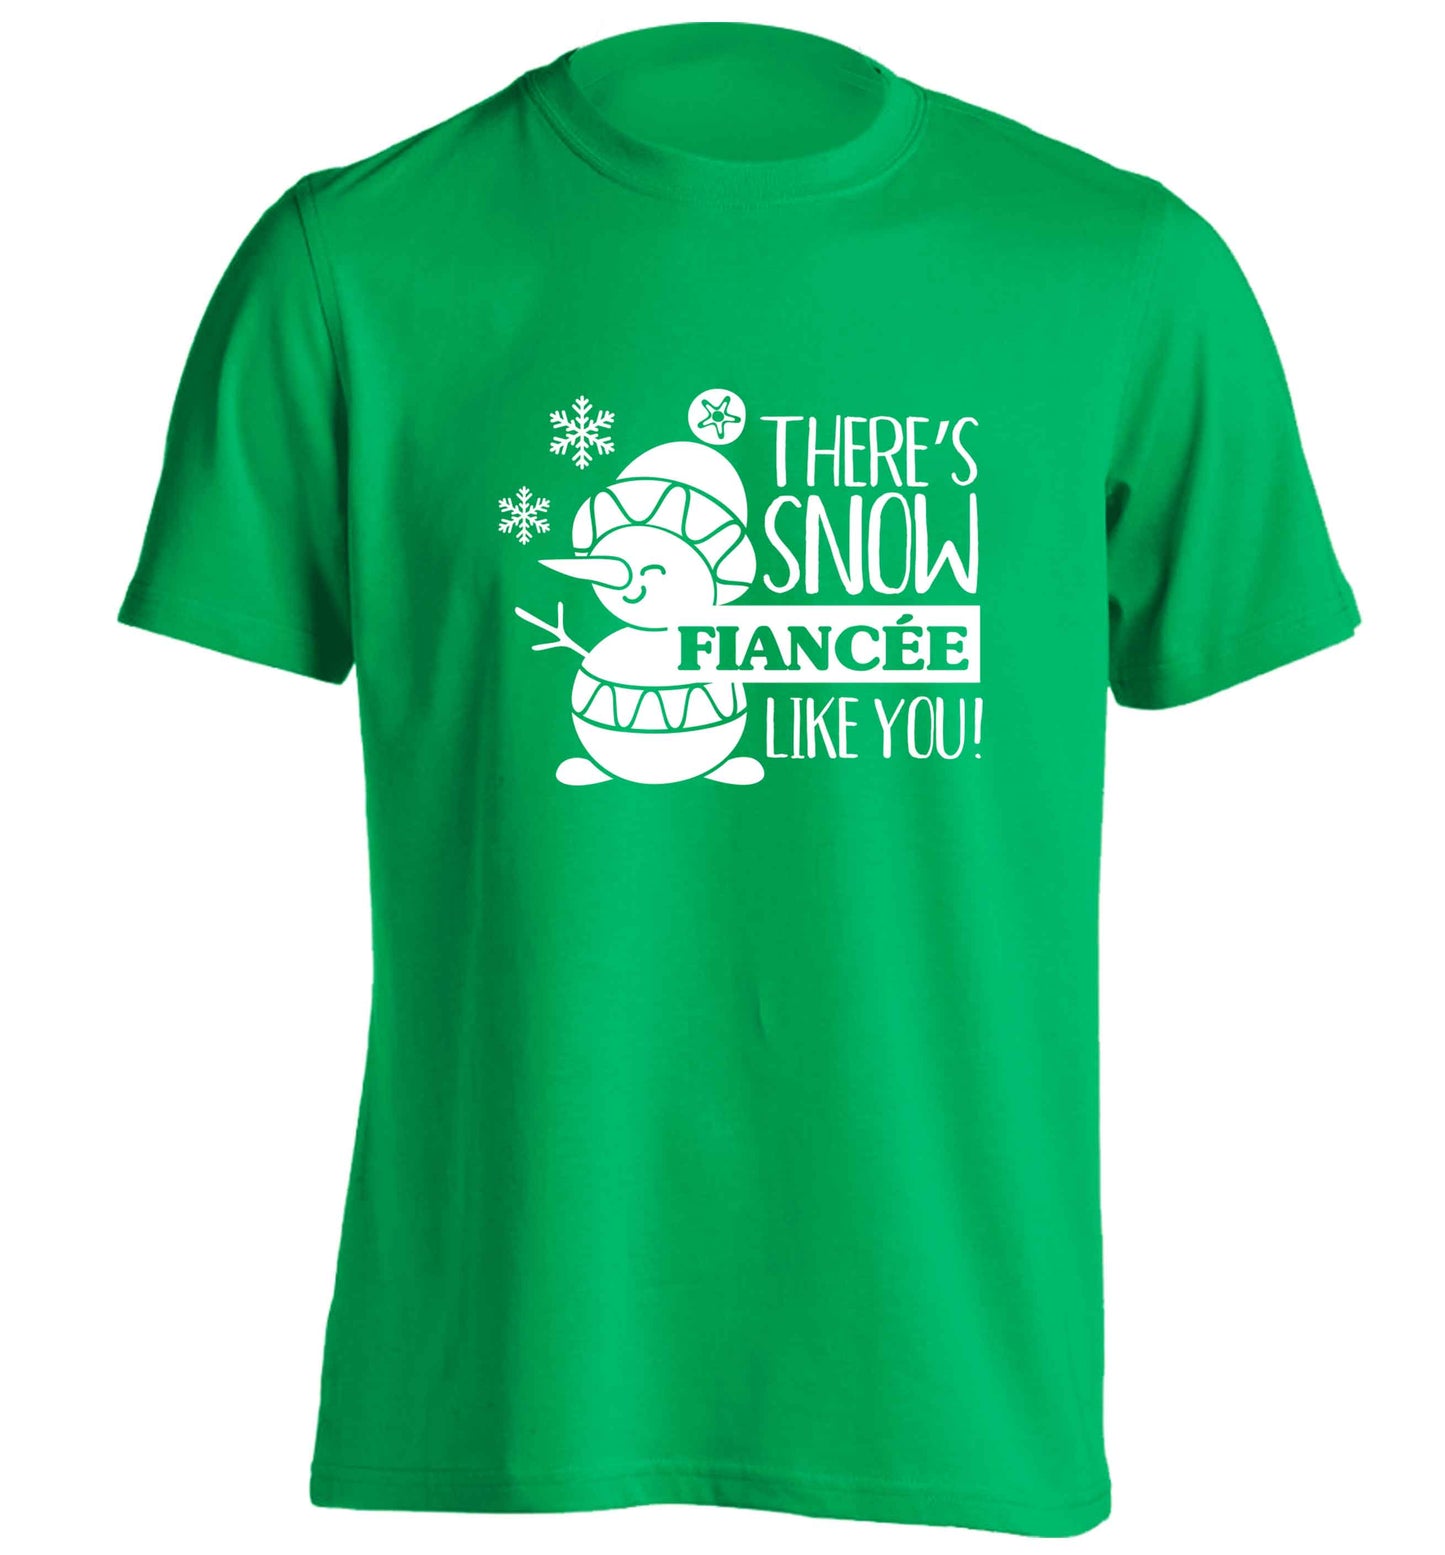 There's snow fiancee like you adults unisex green Tshirt 2XL